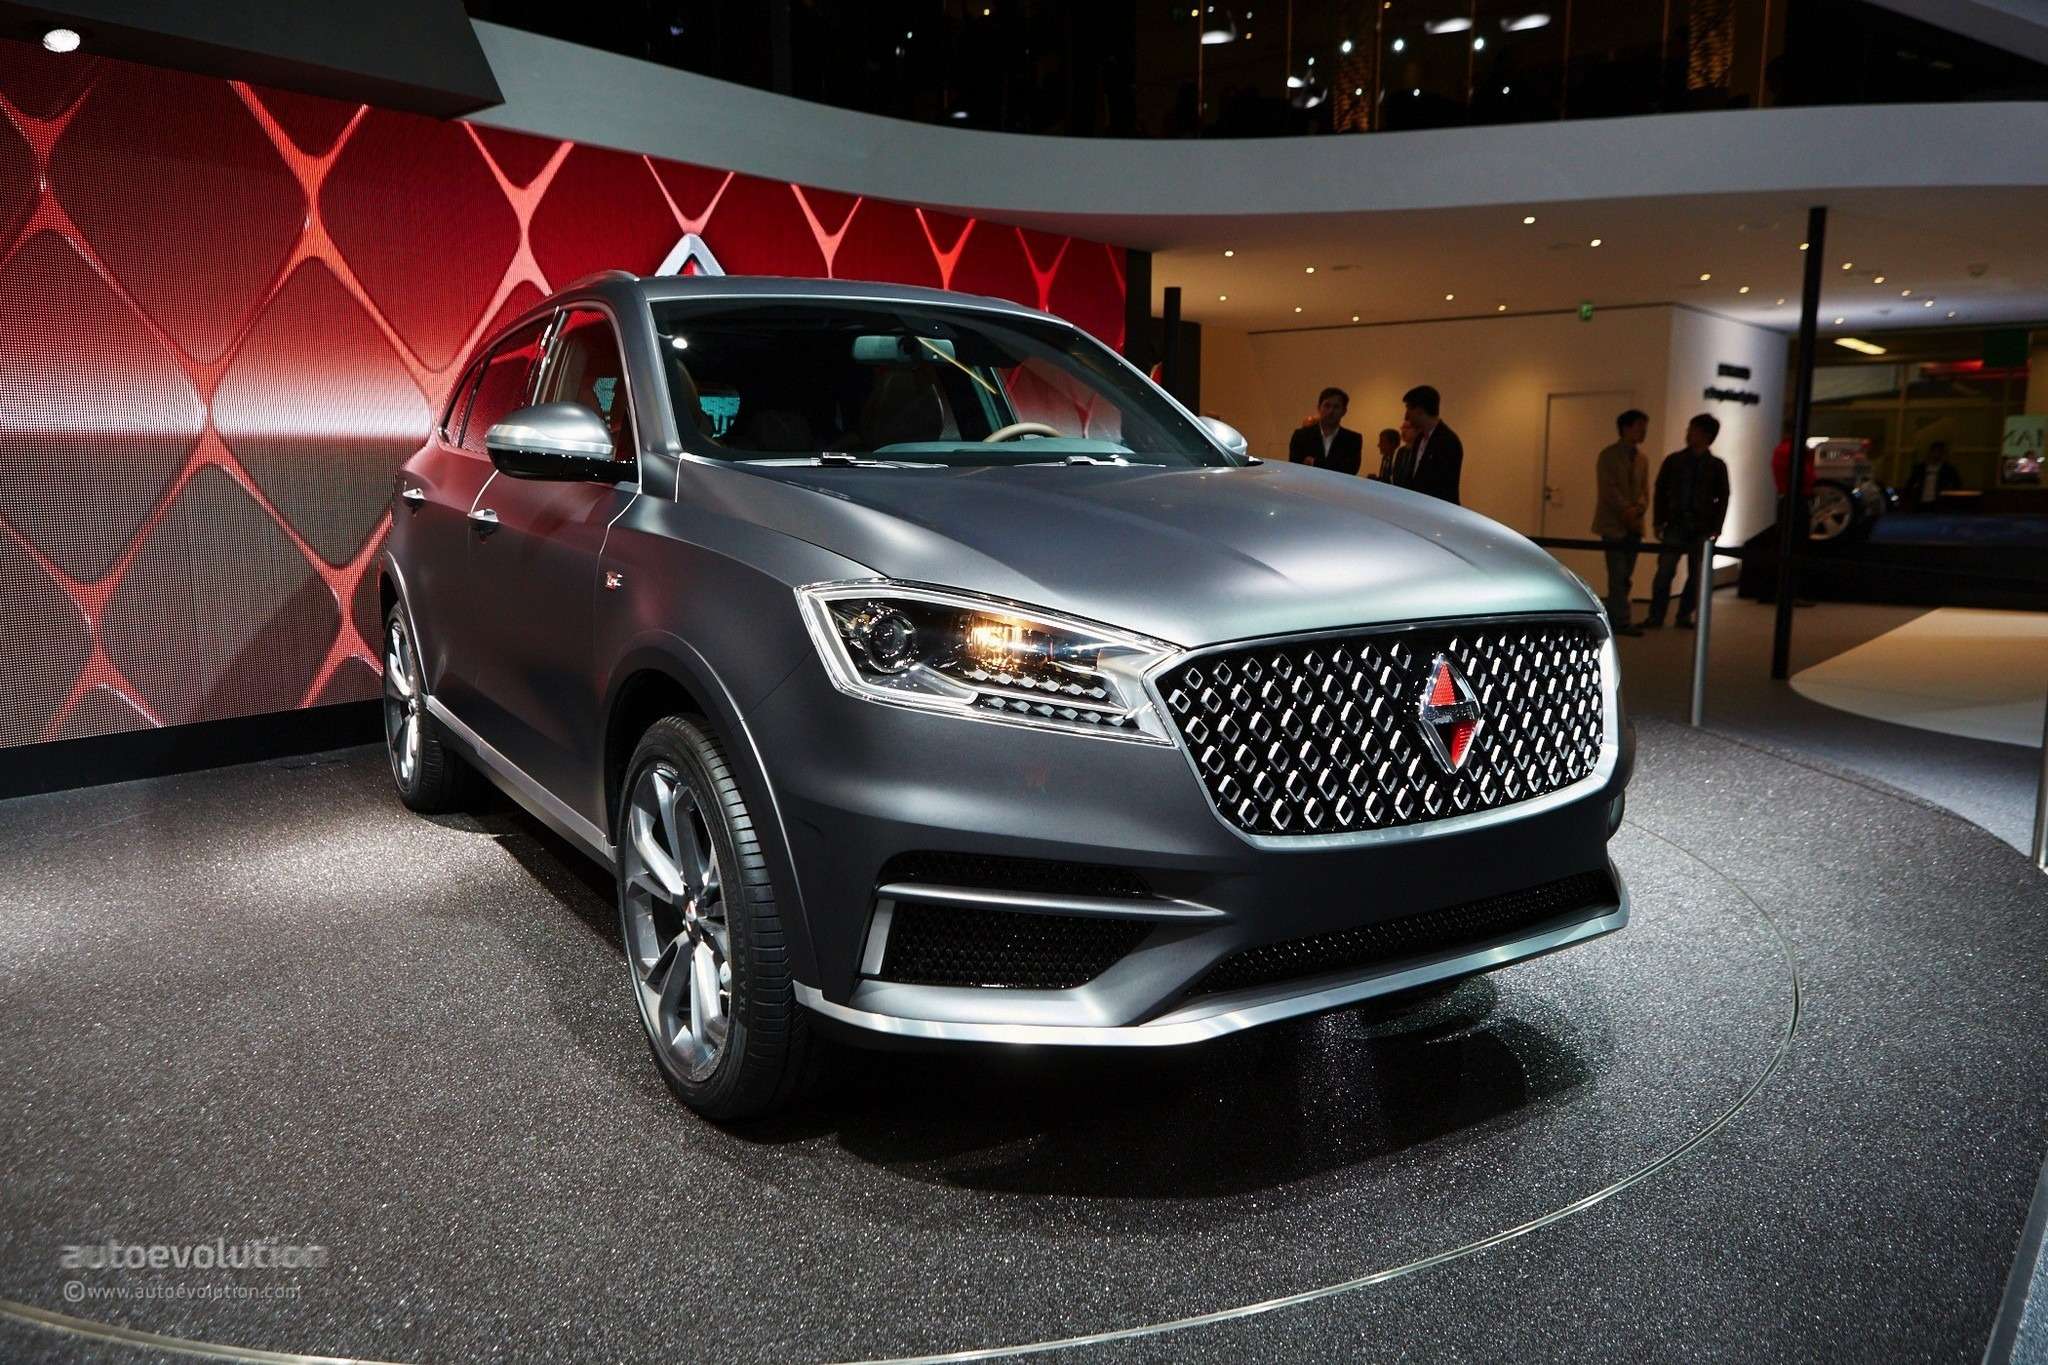 borgward-is-officially-back-with-its-bx7-suv-in-frankfurt-live-photos_27